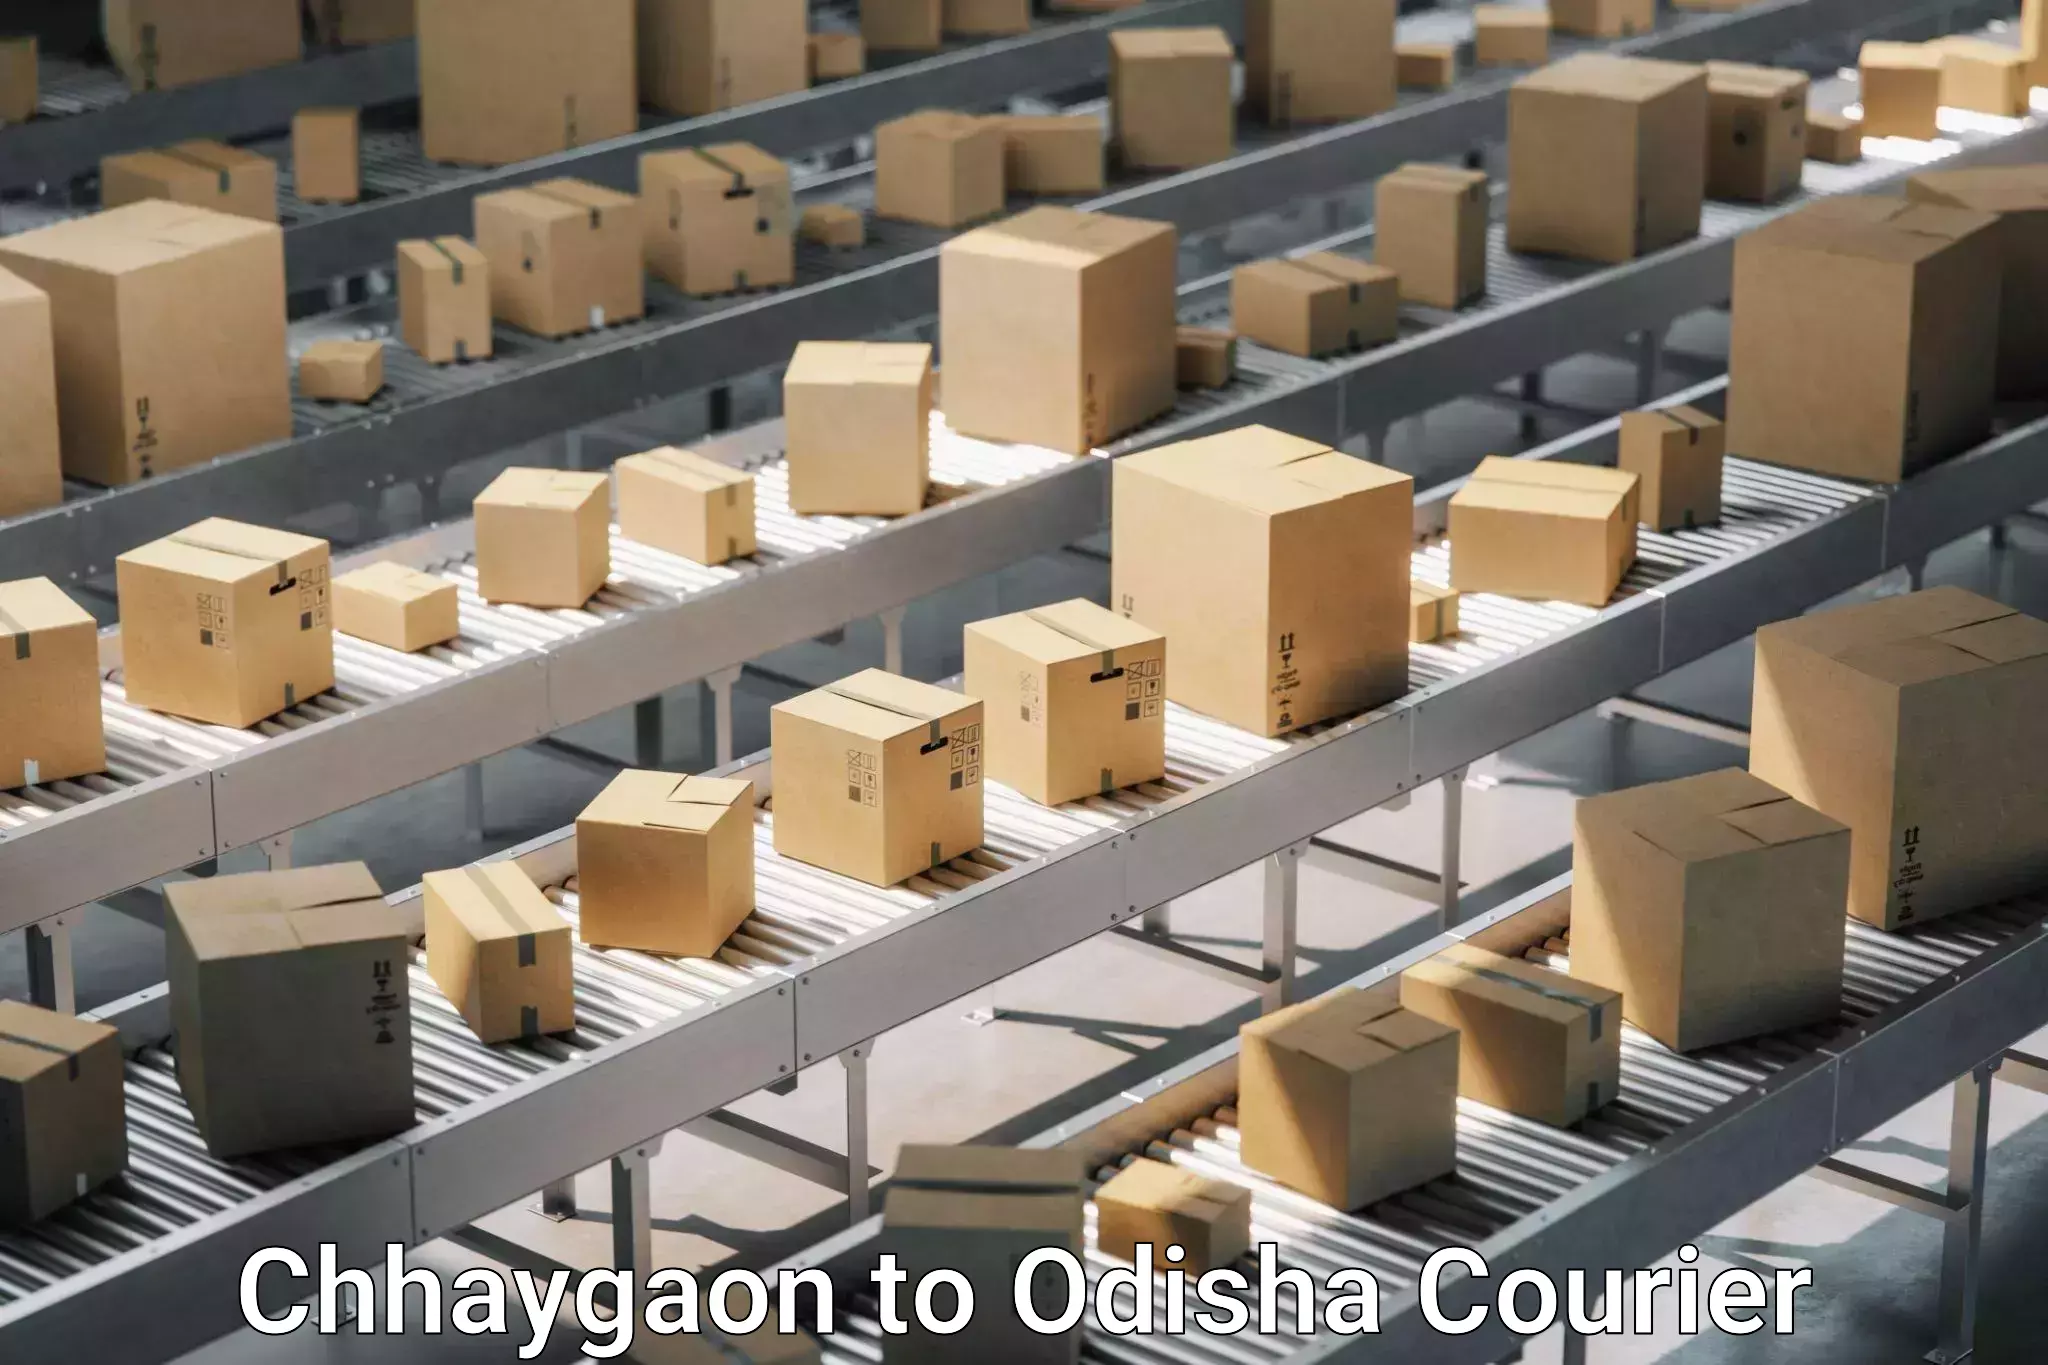 Hassle-free relocation in Chhaygaon to Chhendipada